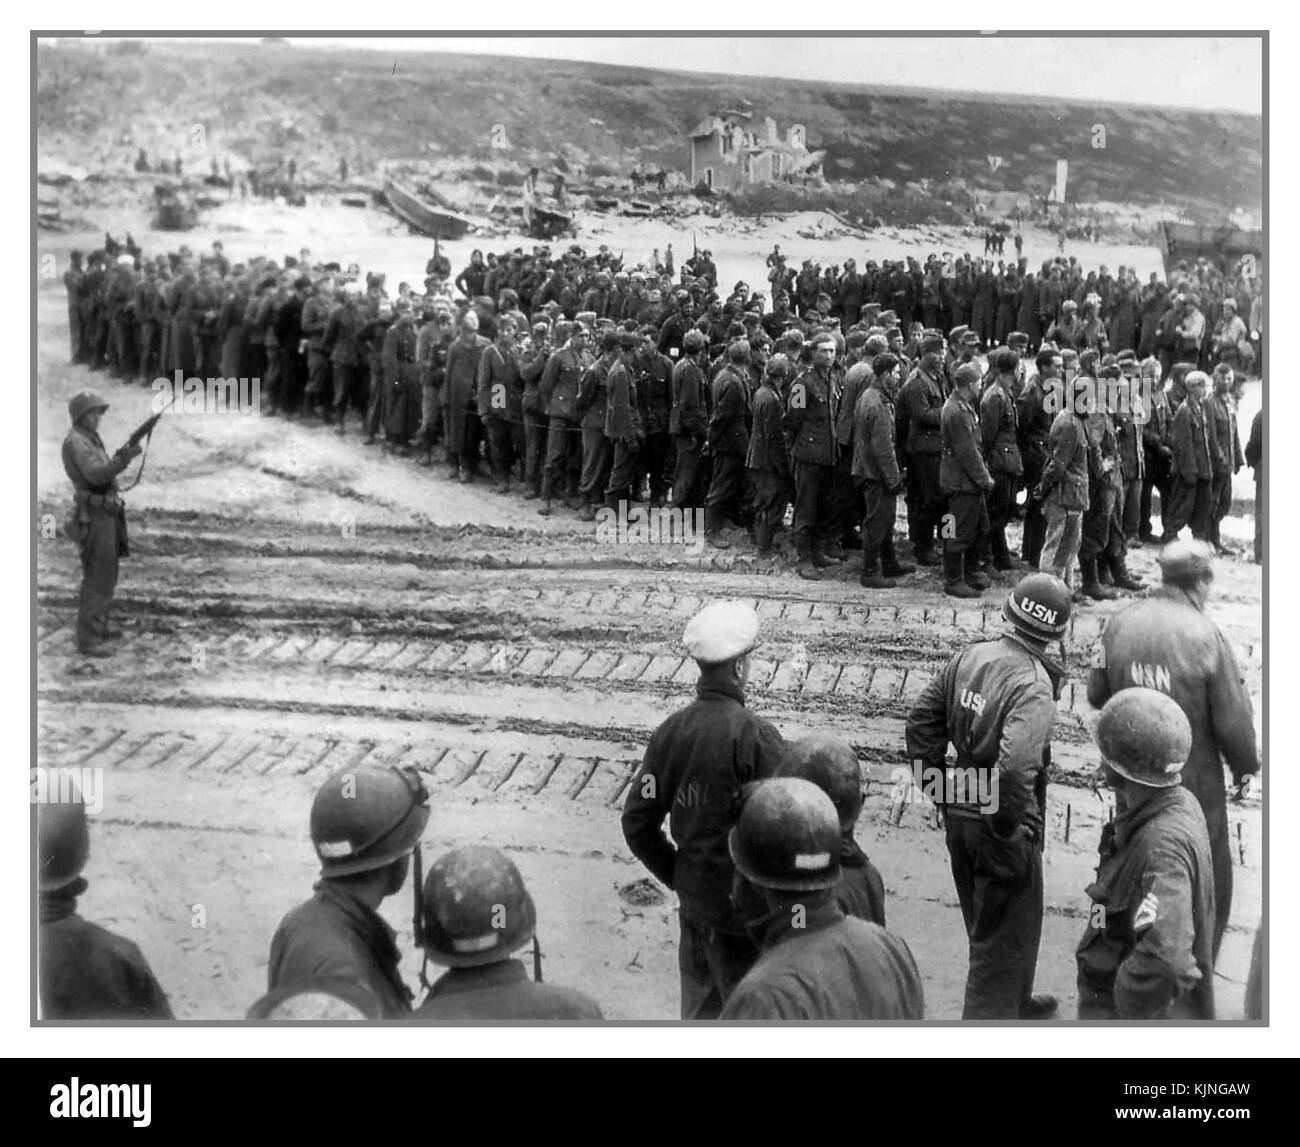 15th June 1944 Omaha Beach German Army Military prisoners POW’s await boat passage to the UK.... Germany D-Day Wehrmacht and Waffen SS prisoners with American GI Troops guarding in foreground Stock Photo